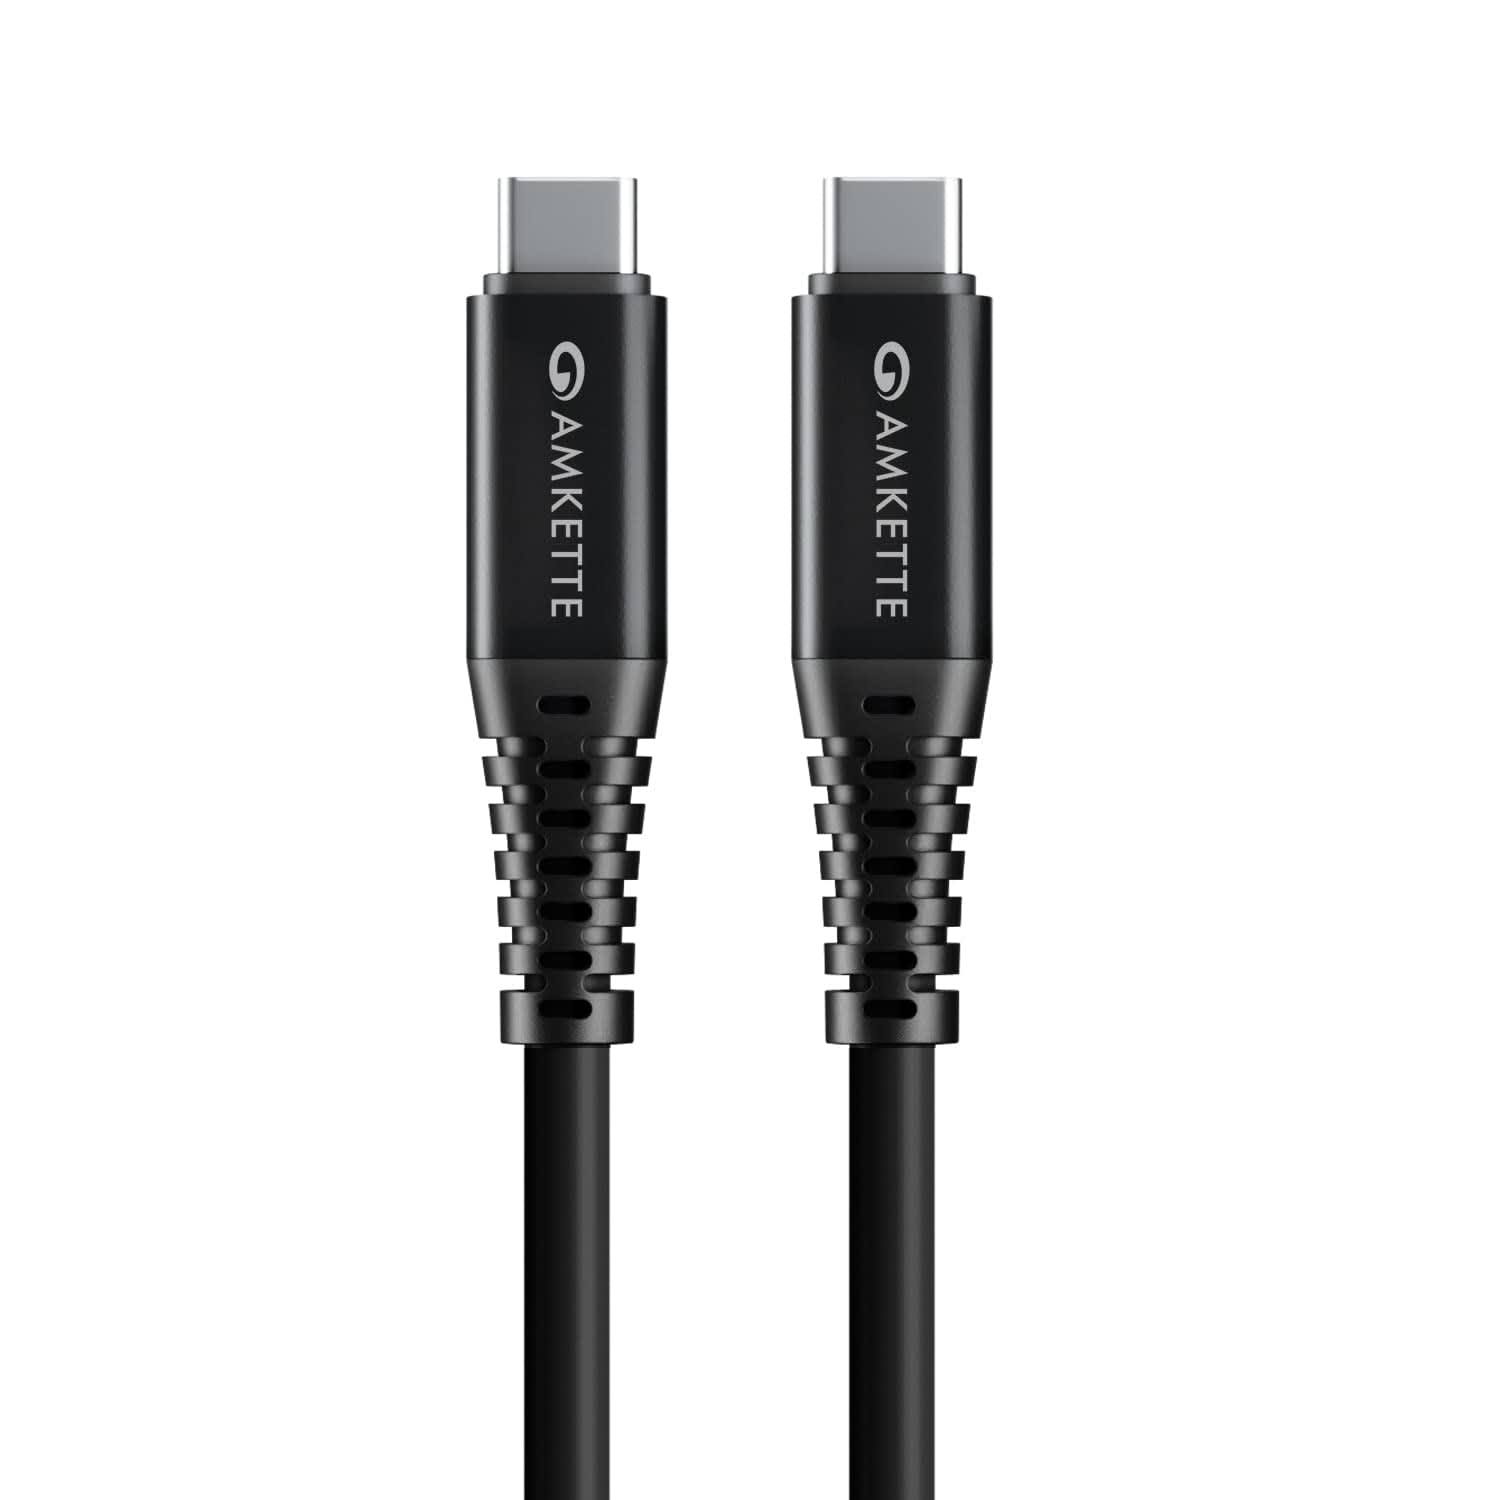 AMKETTE PowerPro Type C to C USB Cable High Speed Data Transfer and Power Delivery Reinforced Connectors for Type C smartphone tablet or laptop 1 Meter Black